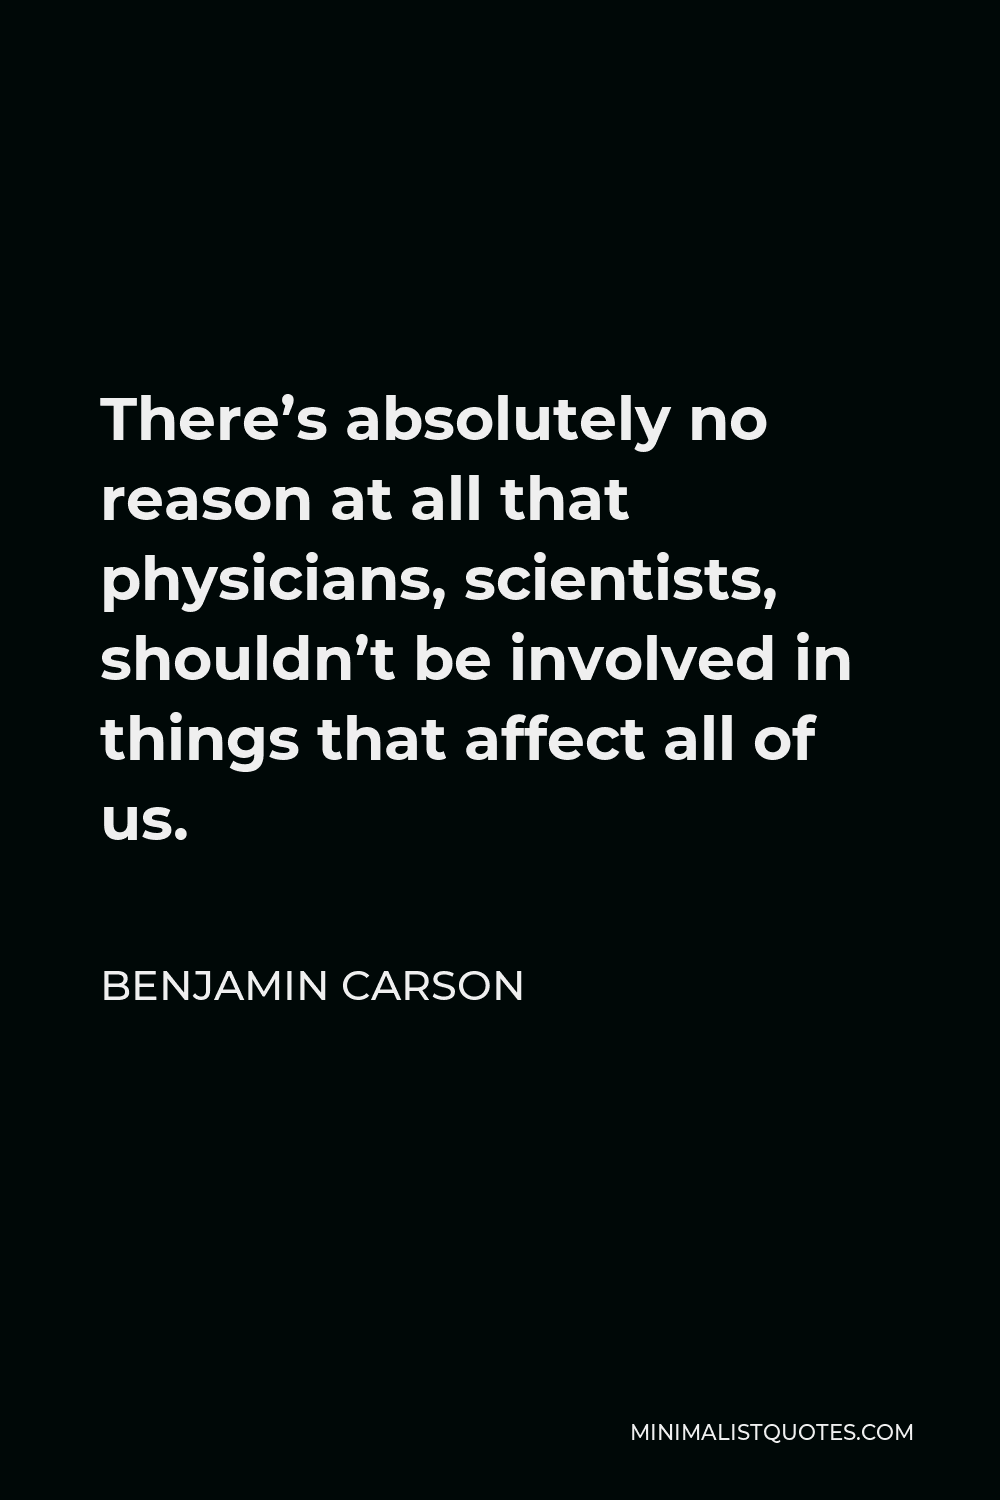 Benjamin Carson Quote - There’s absolutely no reason at all that physicians, scientists, shouldn’t be involved in things that affect all of us.